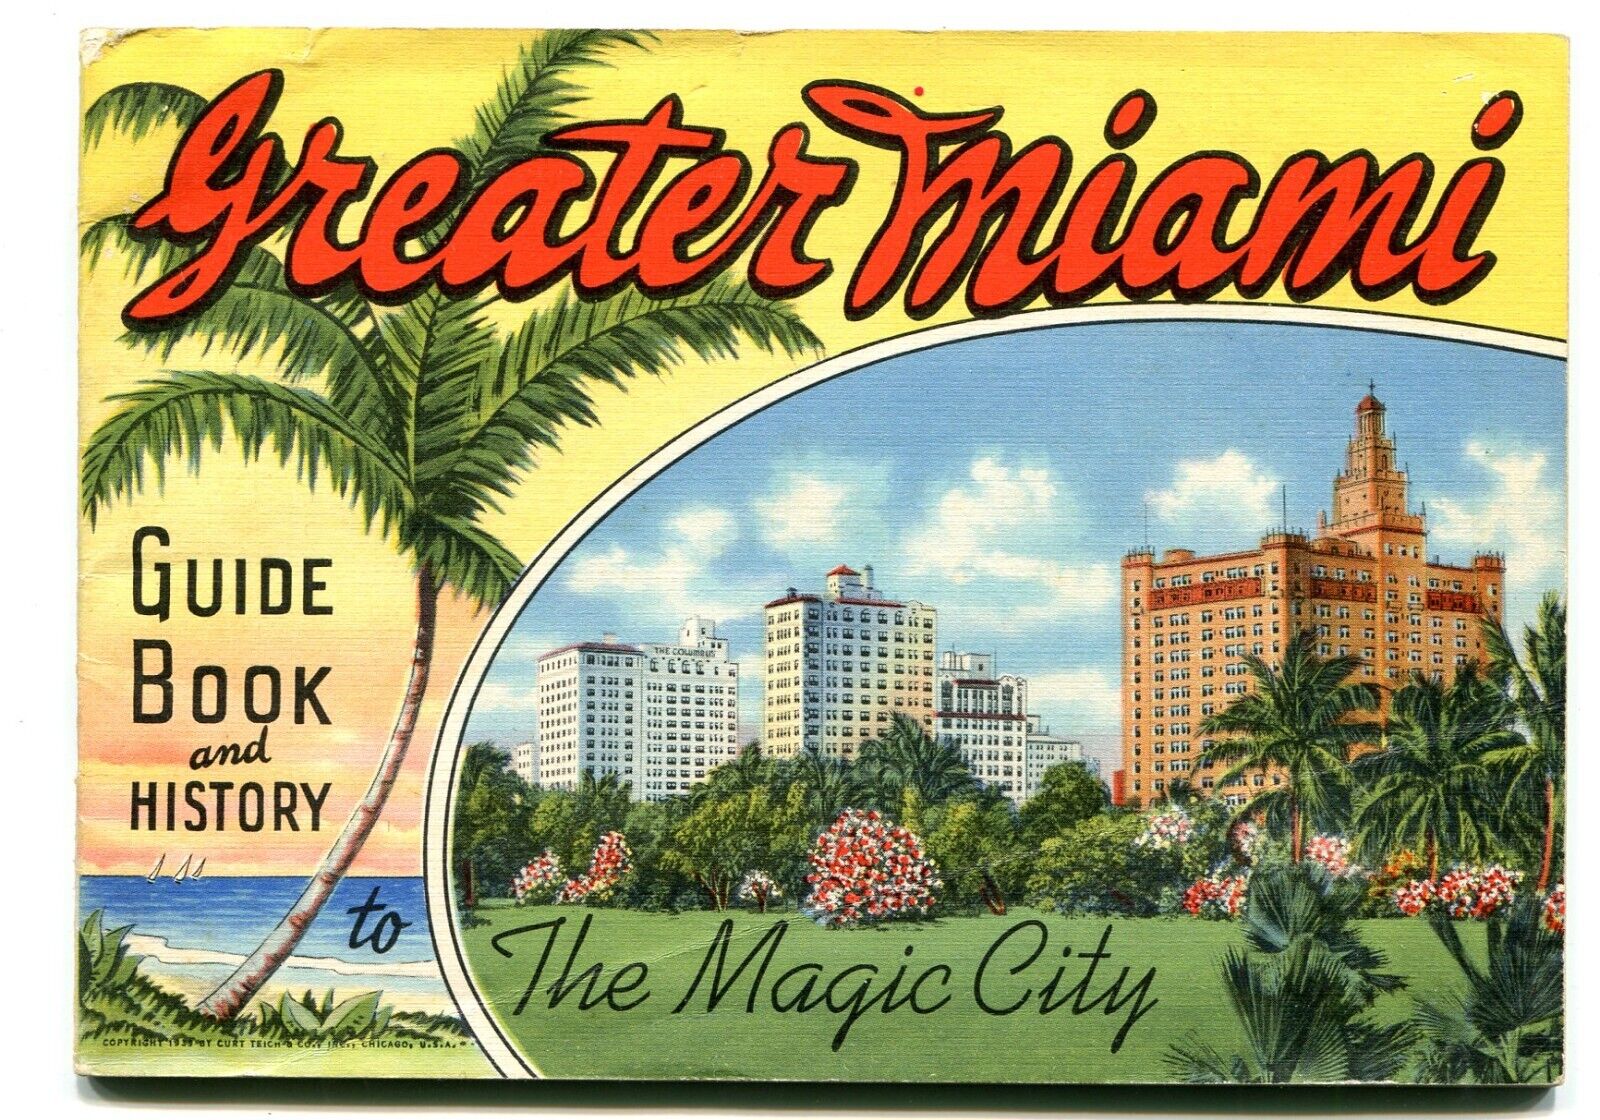 Greater Miami guide and history booklet, 1930-40s, 32pp. Florida